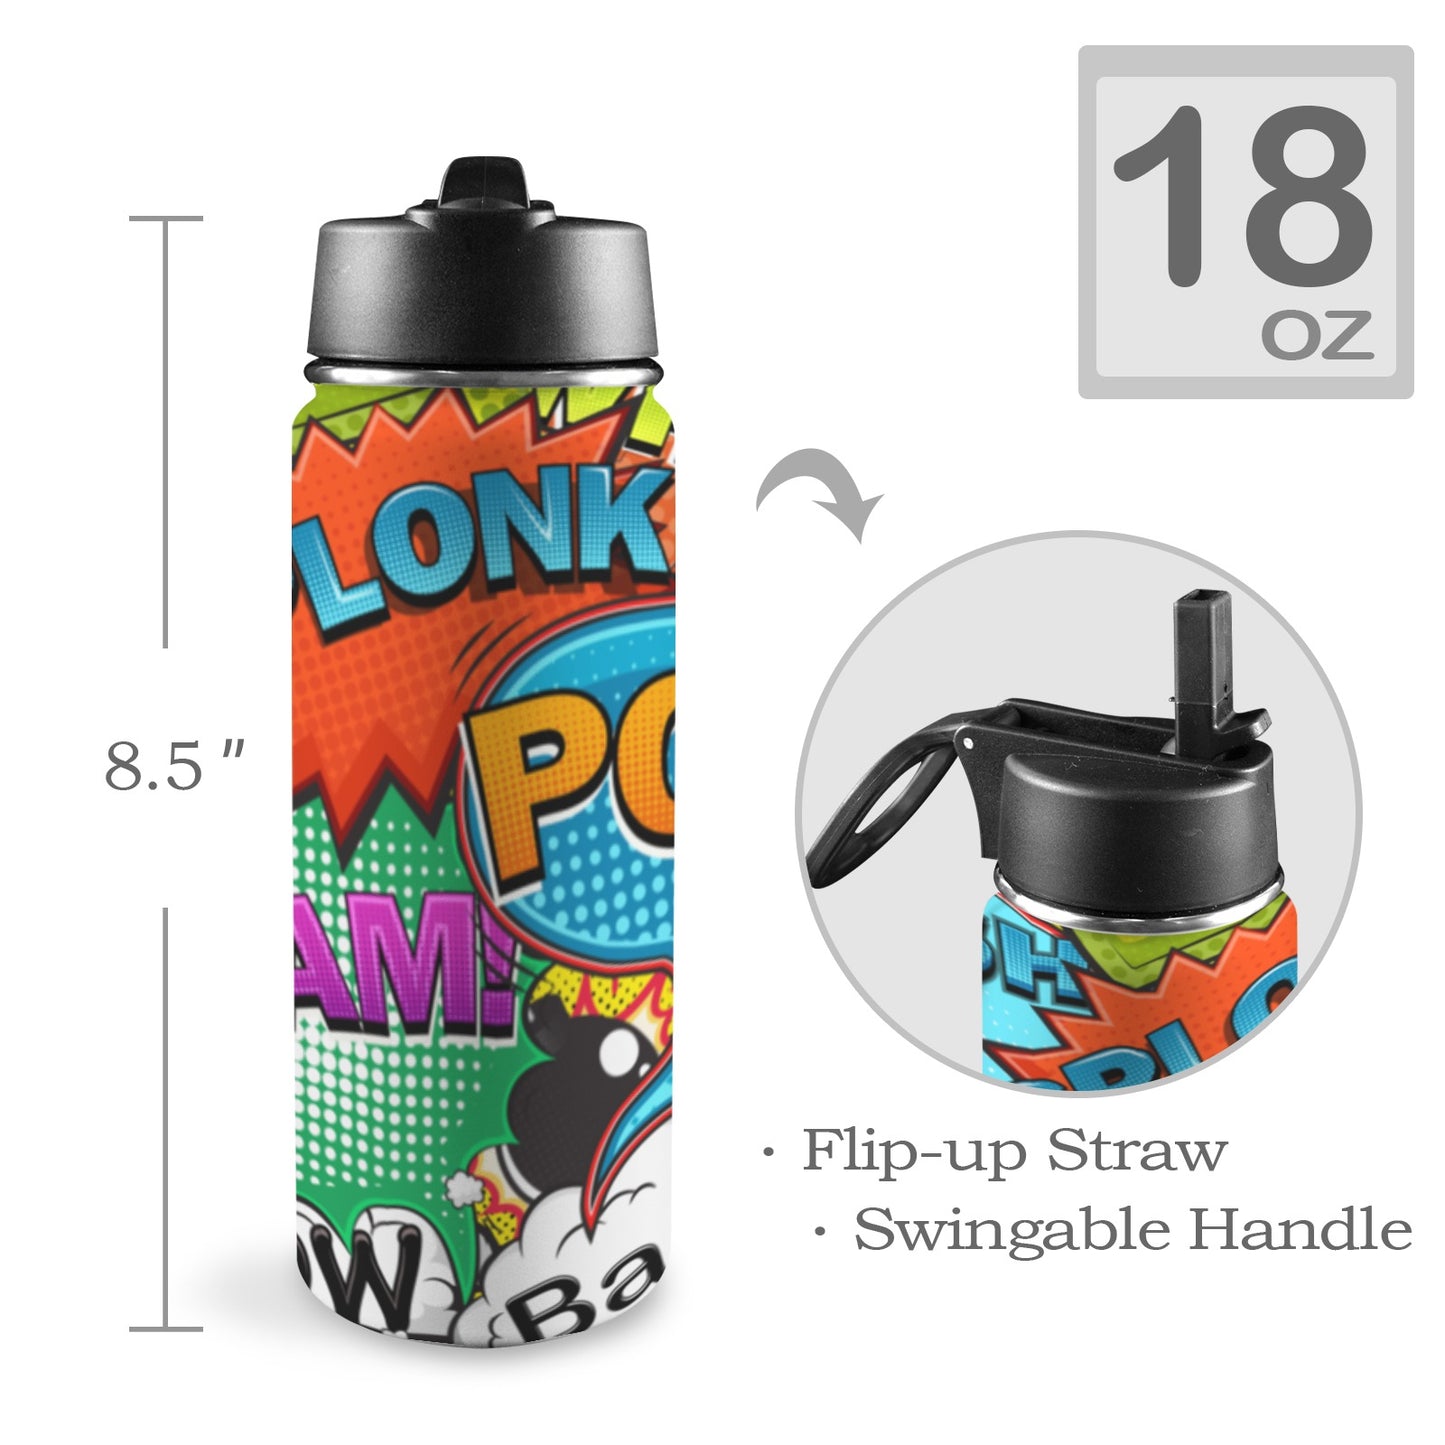 Comic Book 2 - Insulated Water Bottle with Straw Lid (18oz) Insulated Water Bottle with Swing Handle